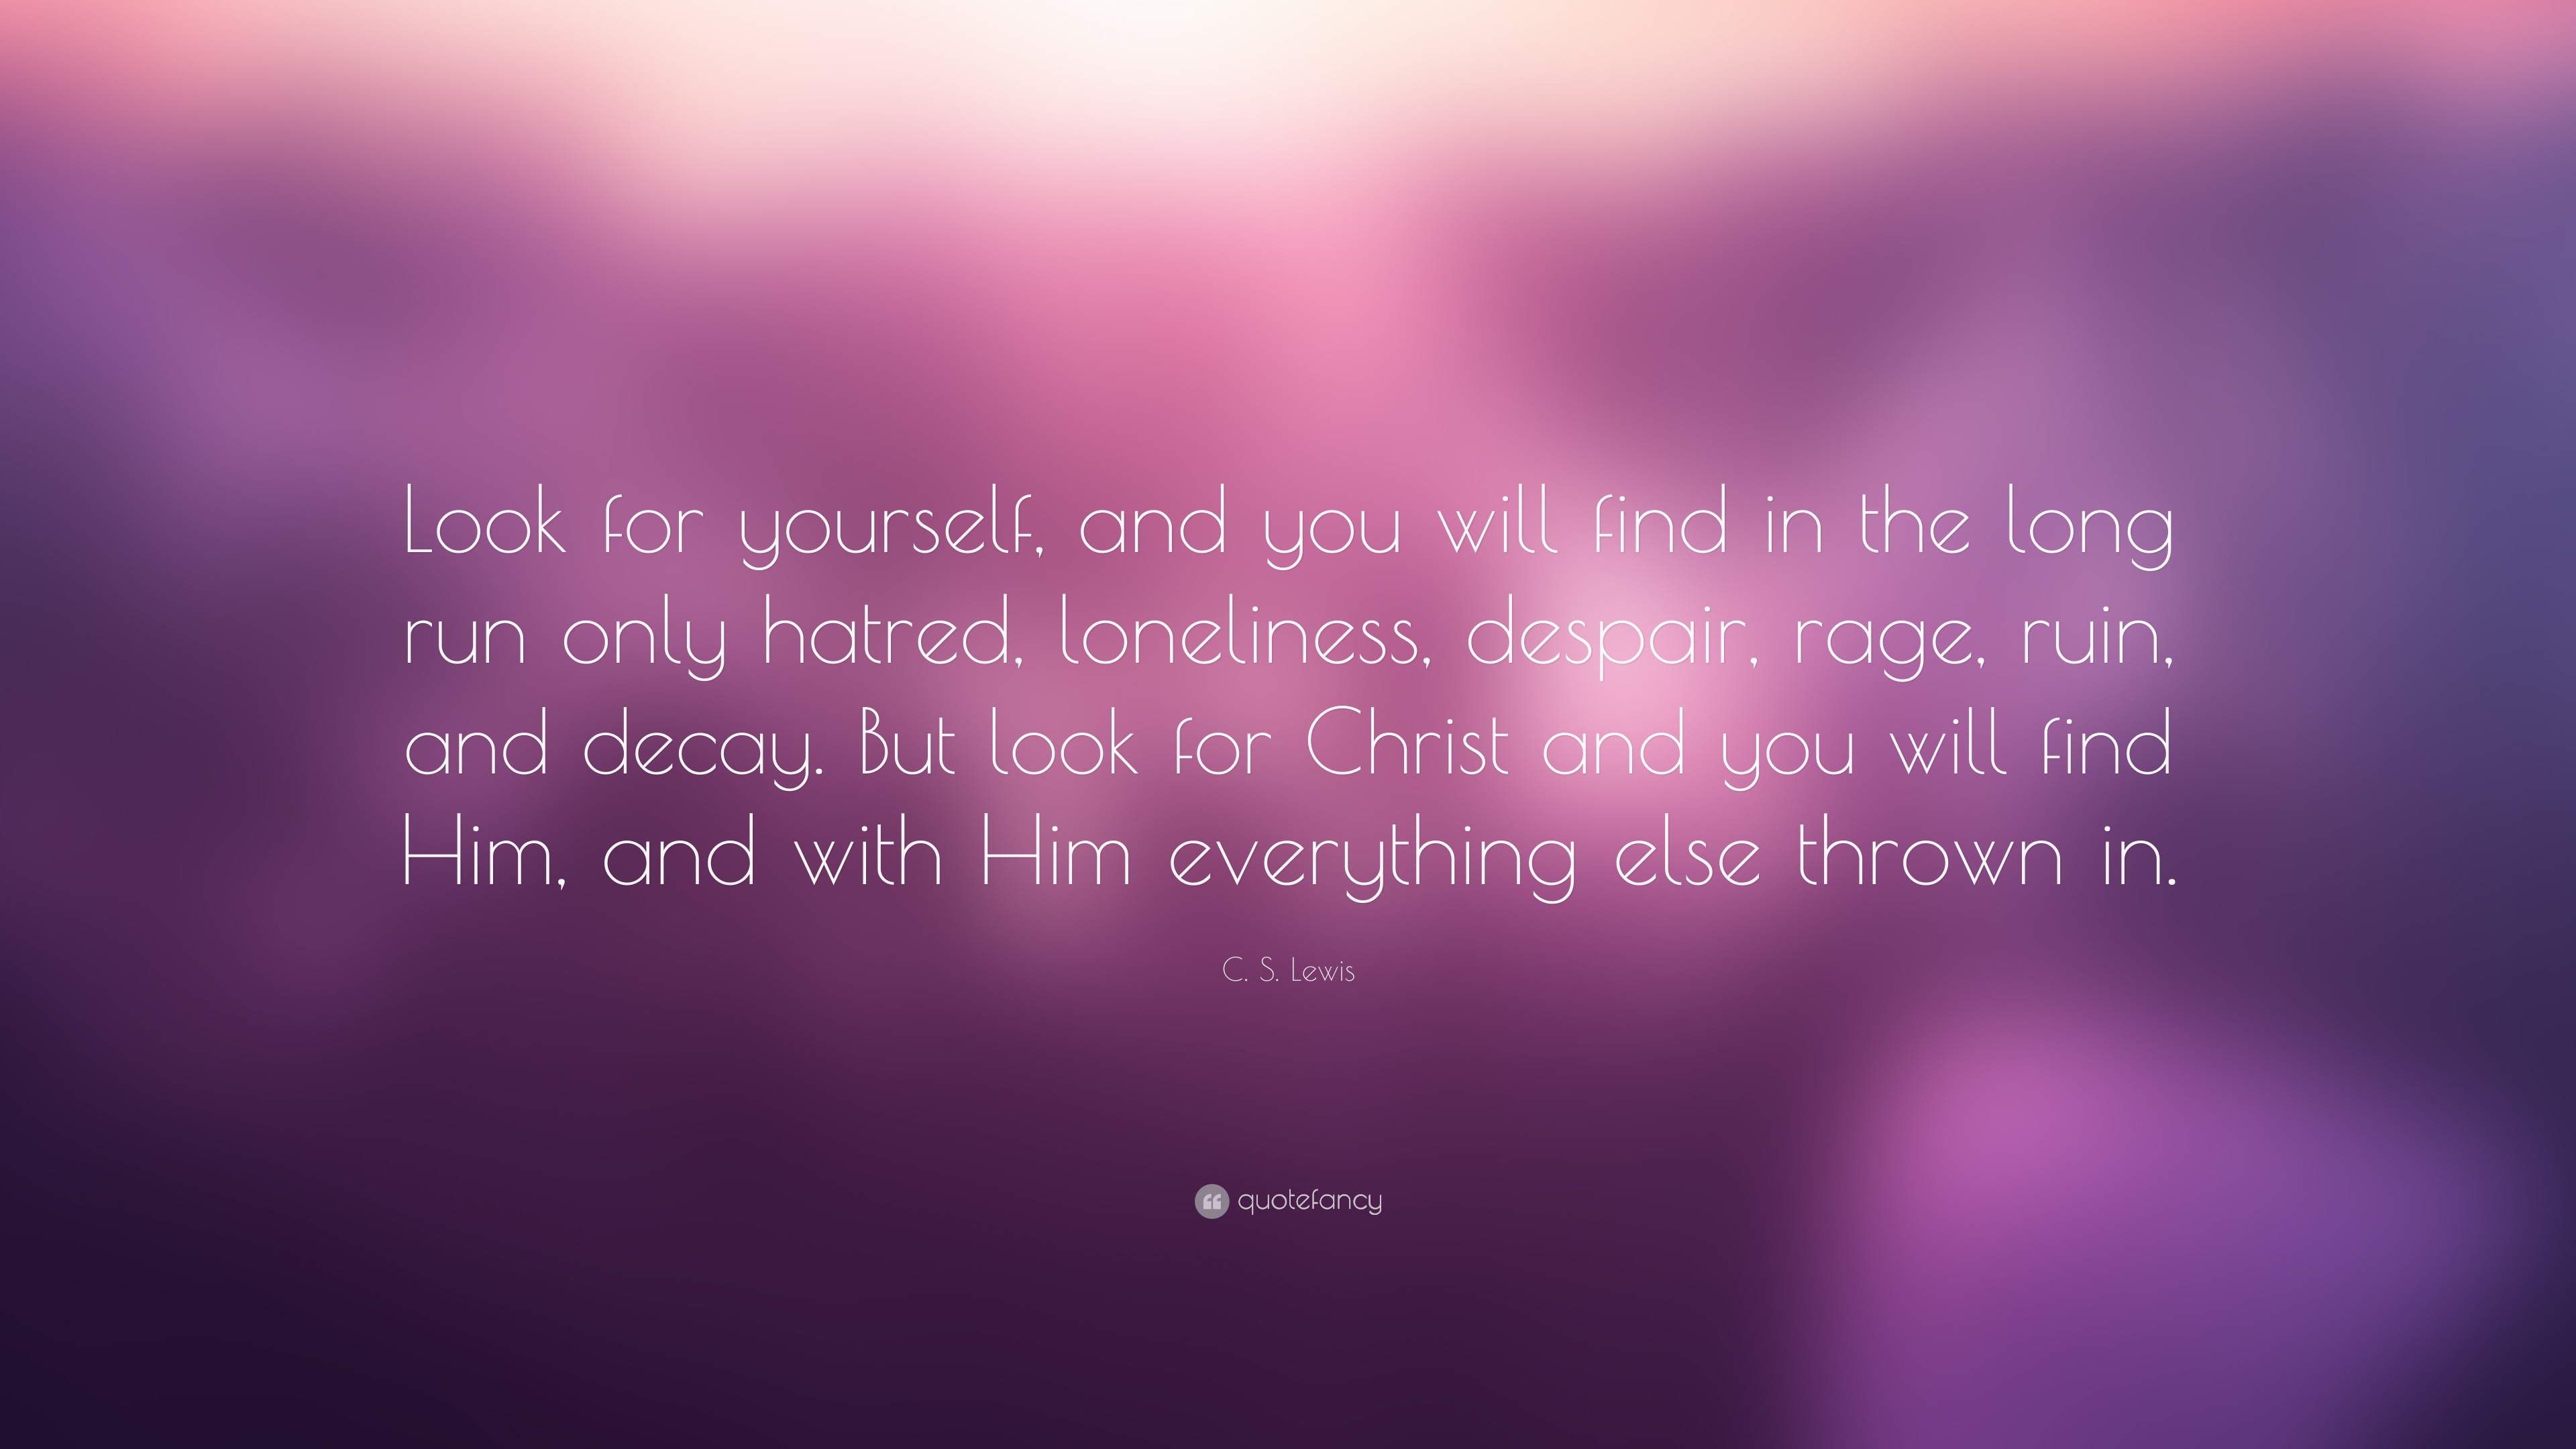 C. S. Lewis Quote: “Look for yourself, and you will find in the long ...